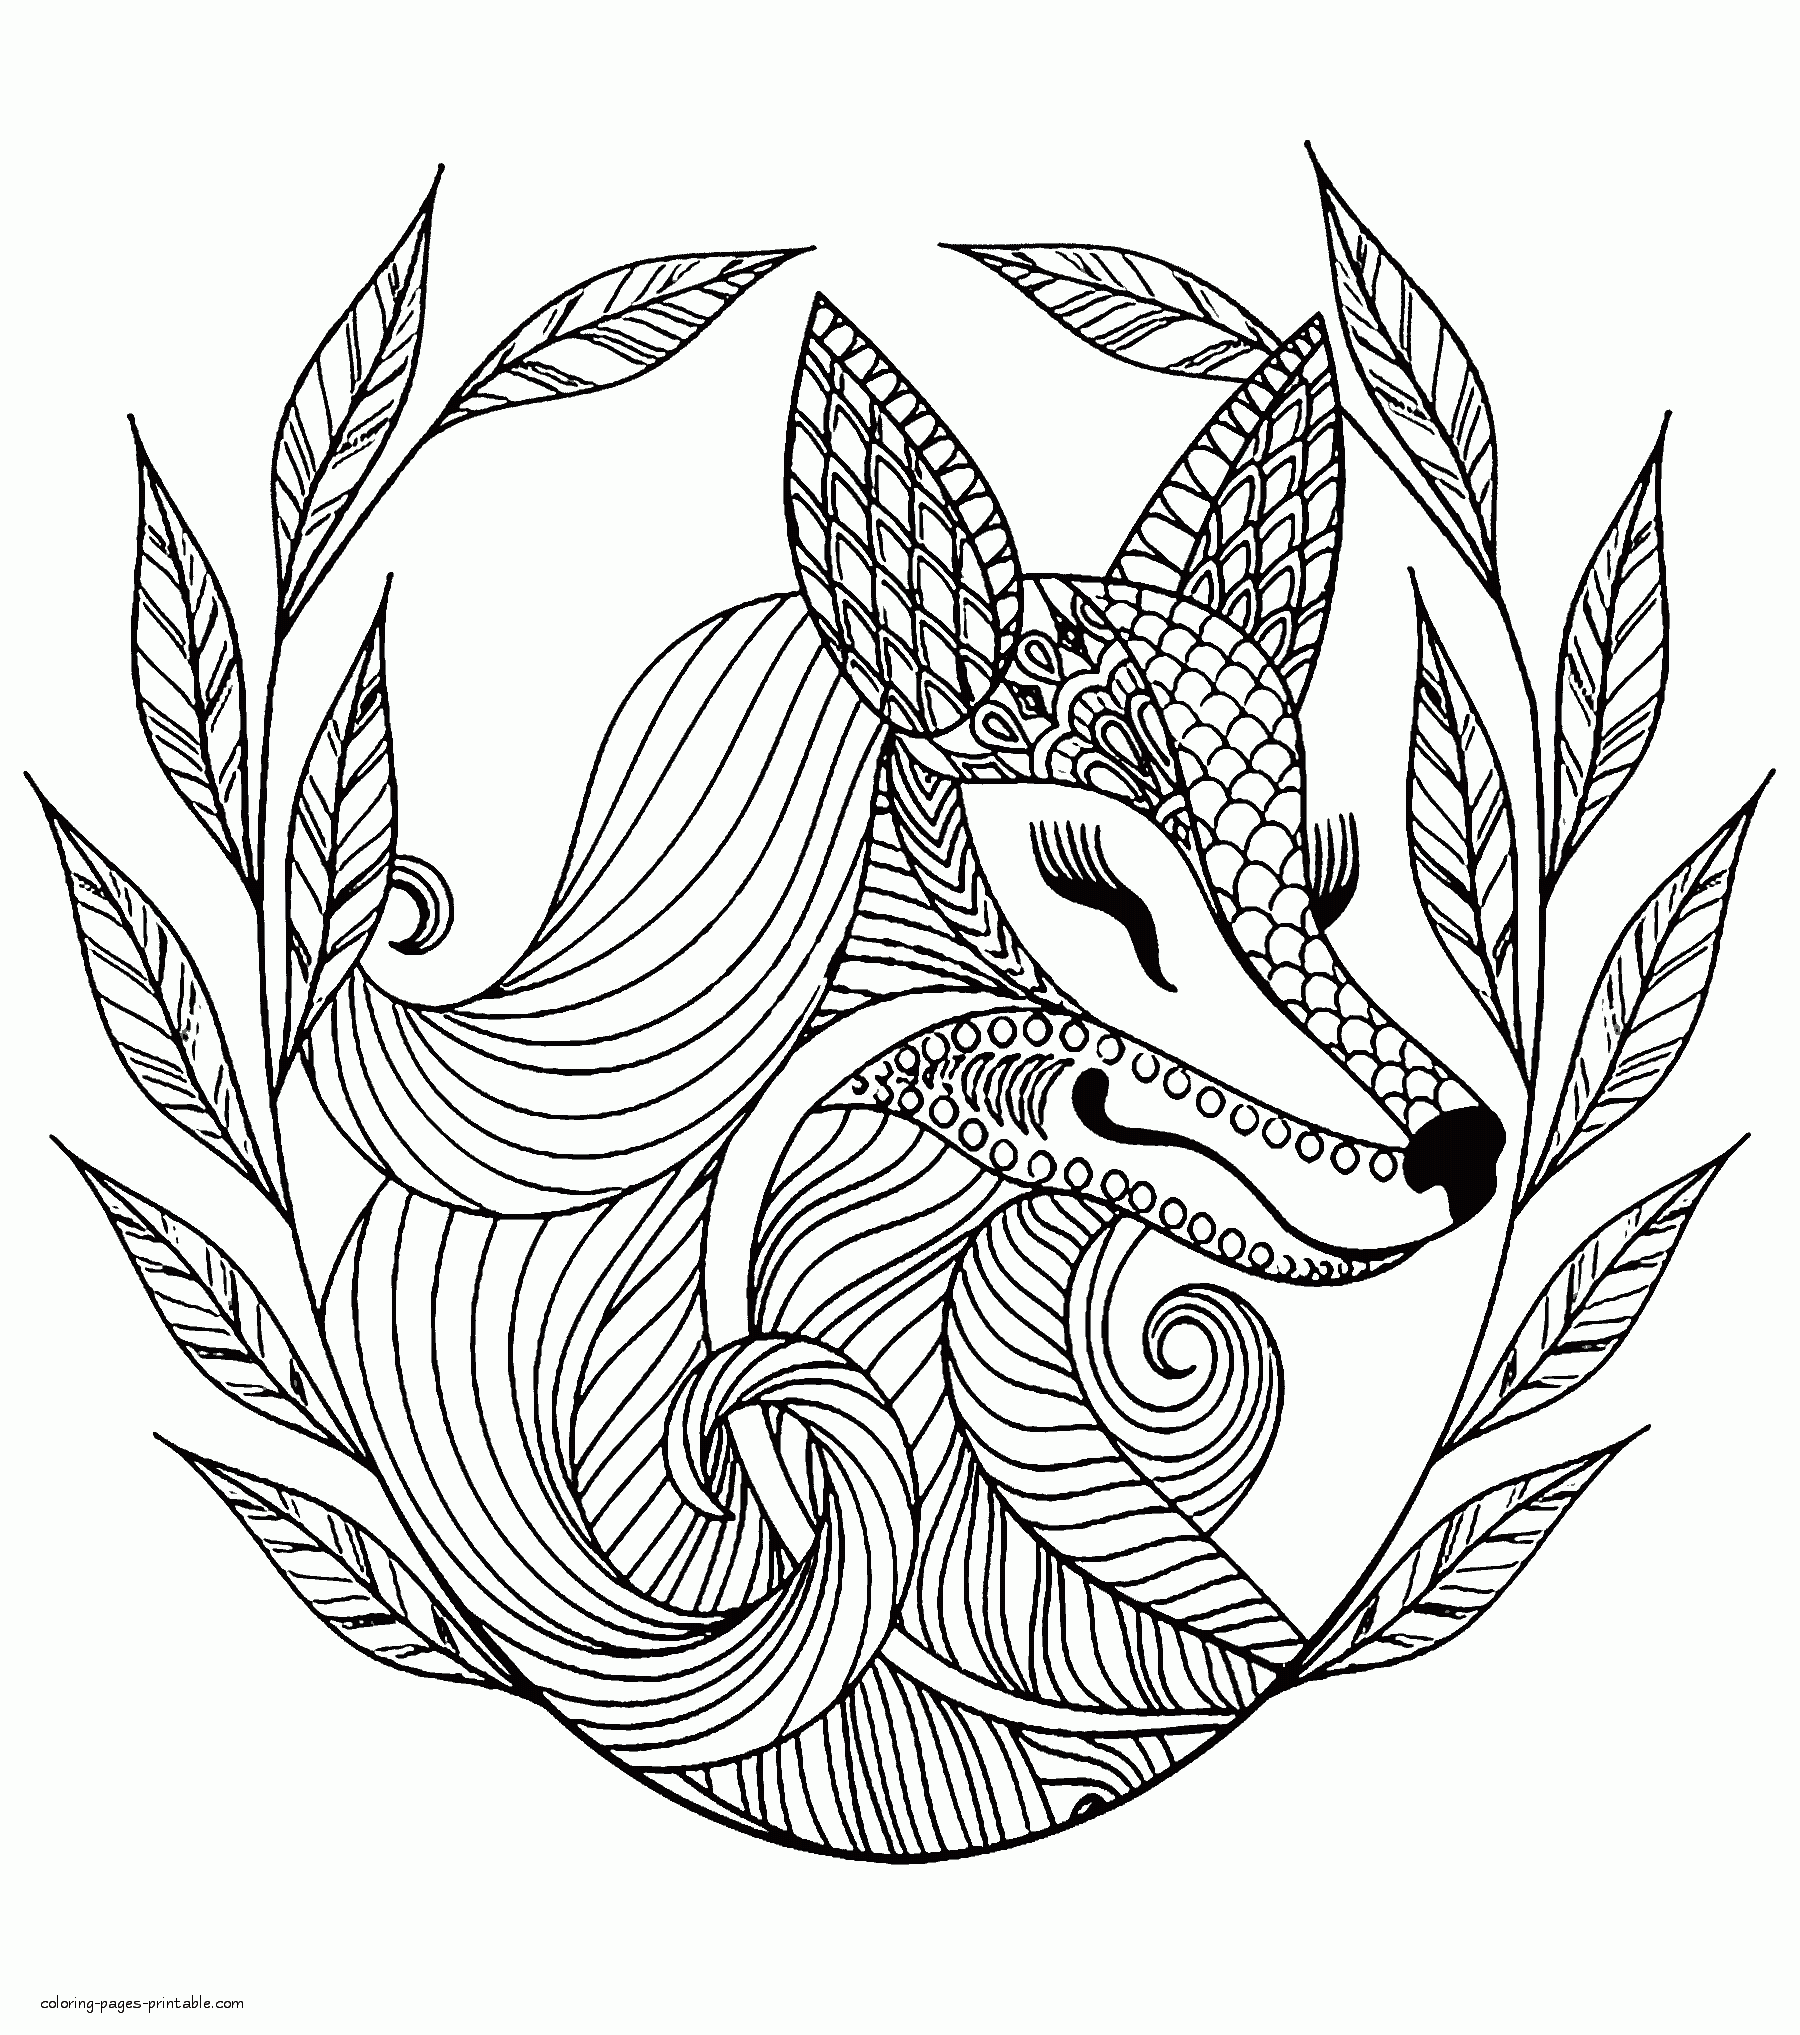 Cute Animal Colouring Pages. A Fox